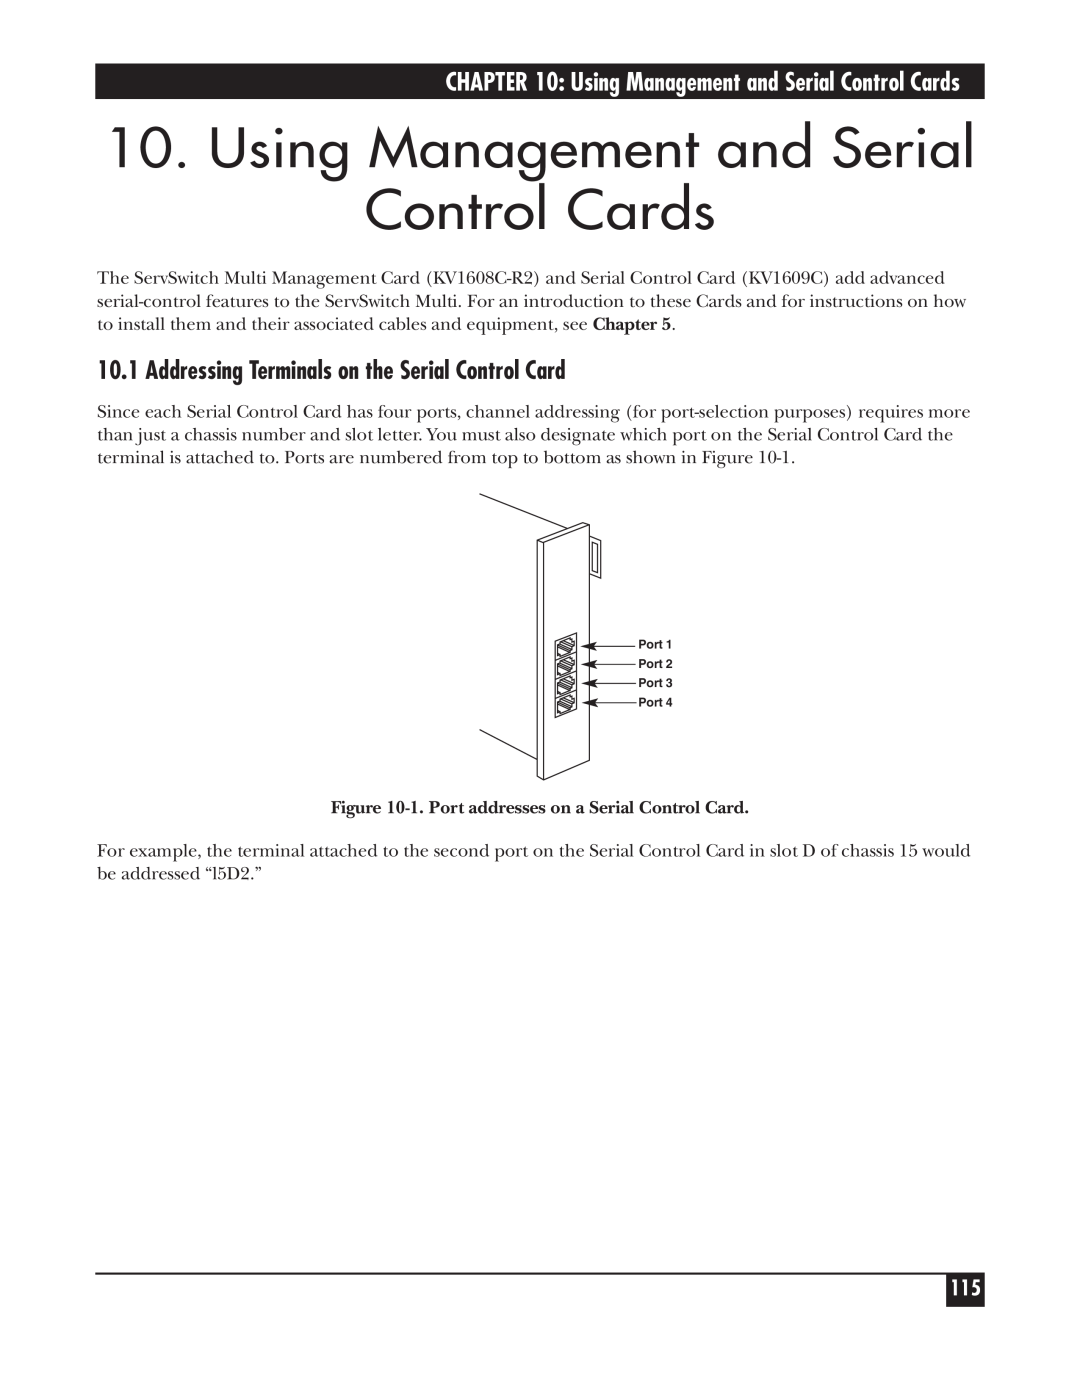 Black Box KV162A manual Using Management and Serial Control Cards, Addressing Terminals on the Serial Control Card 